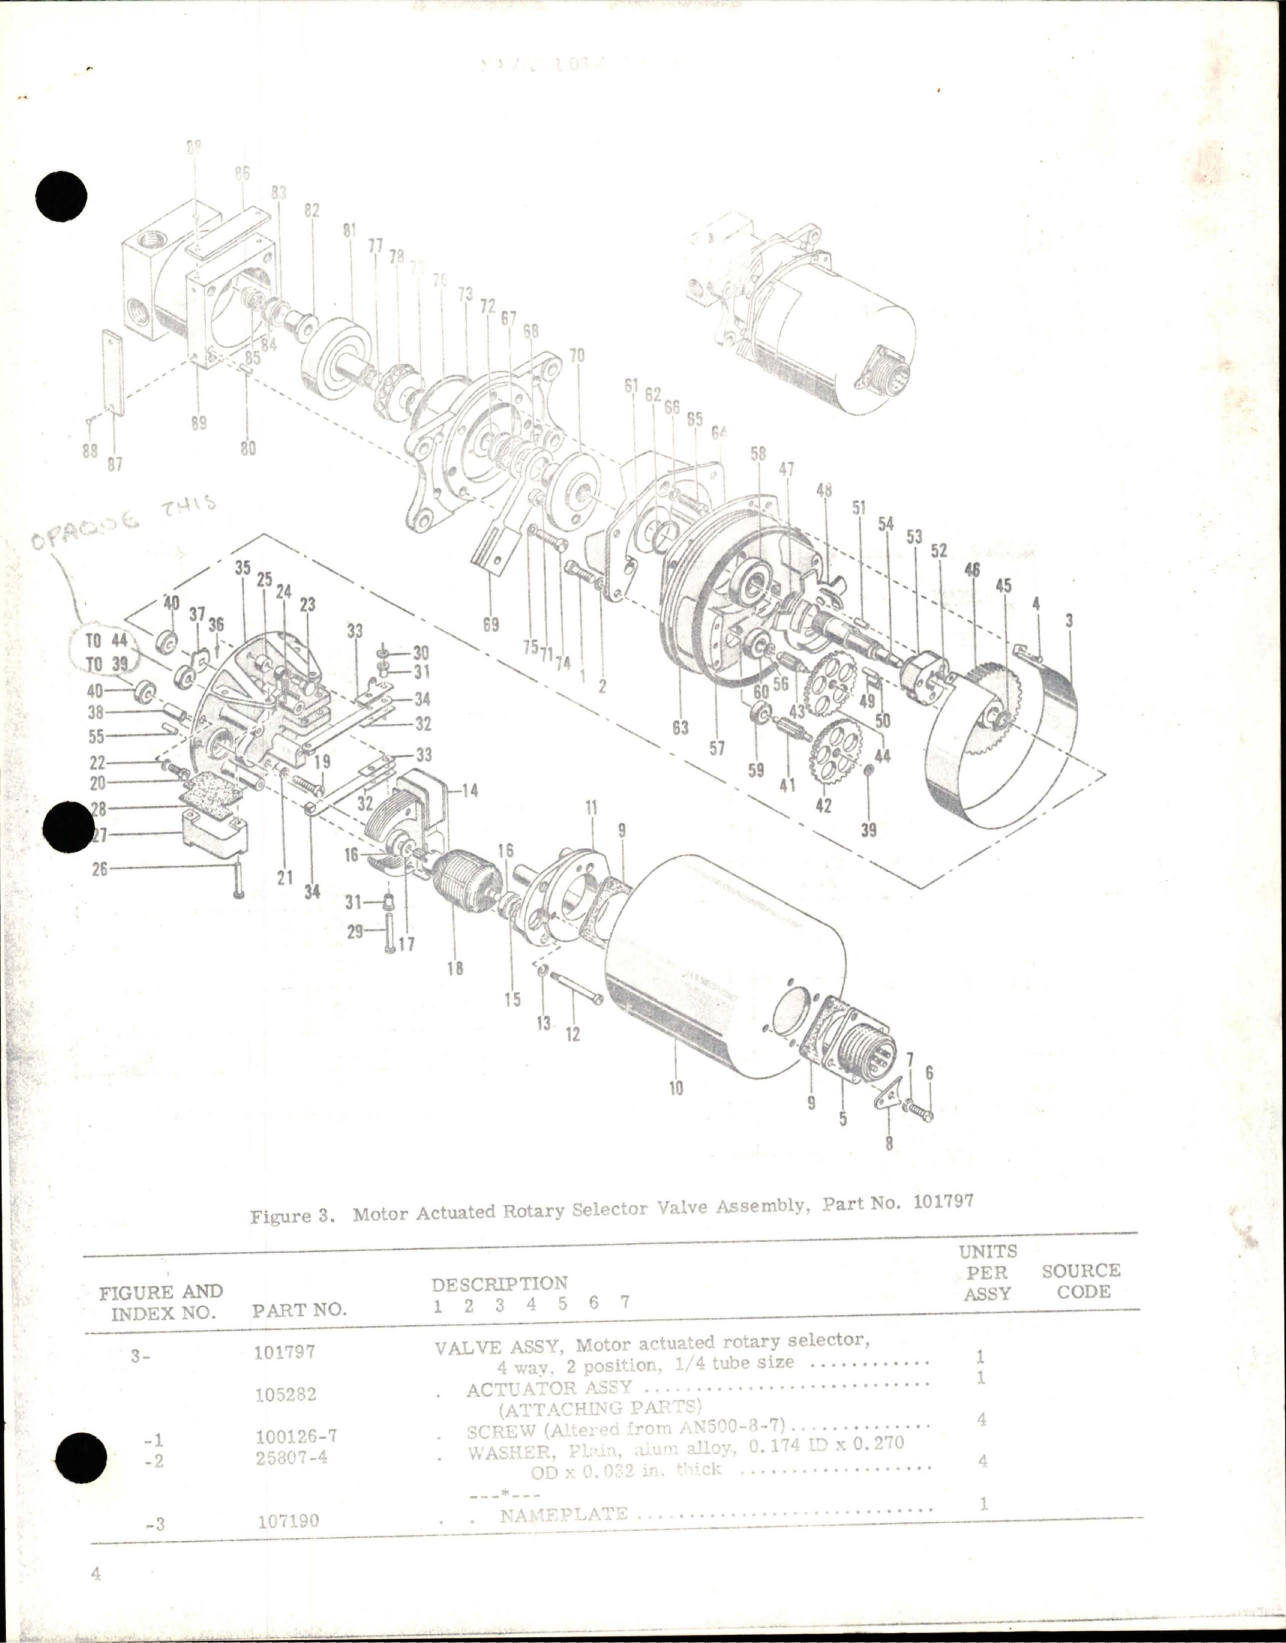 Sample page 5 from AirCorps Library document: Overhaul Instructions with Parts Breakdown for Motor Actuated Rotary Selector Valve Assembly - Part 101797